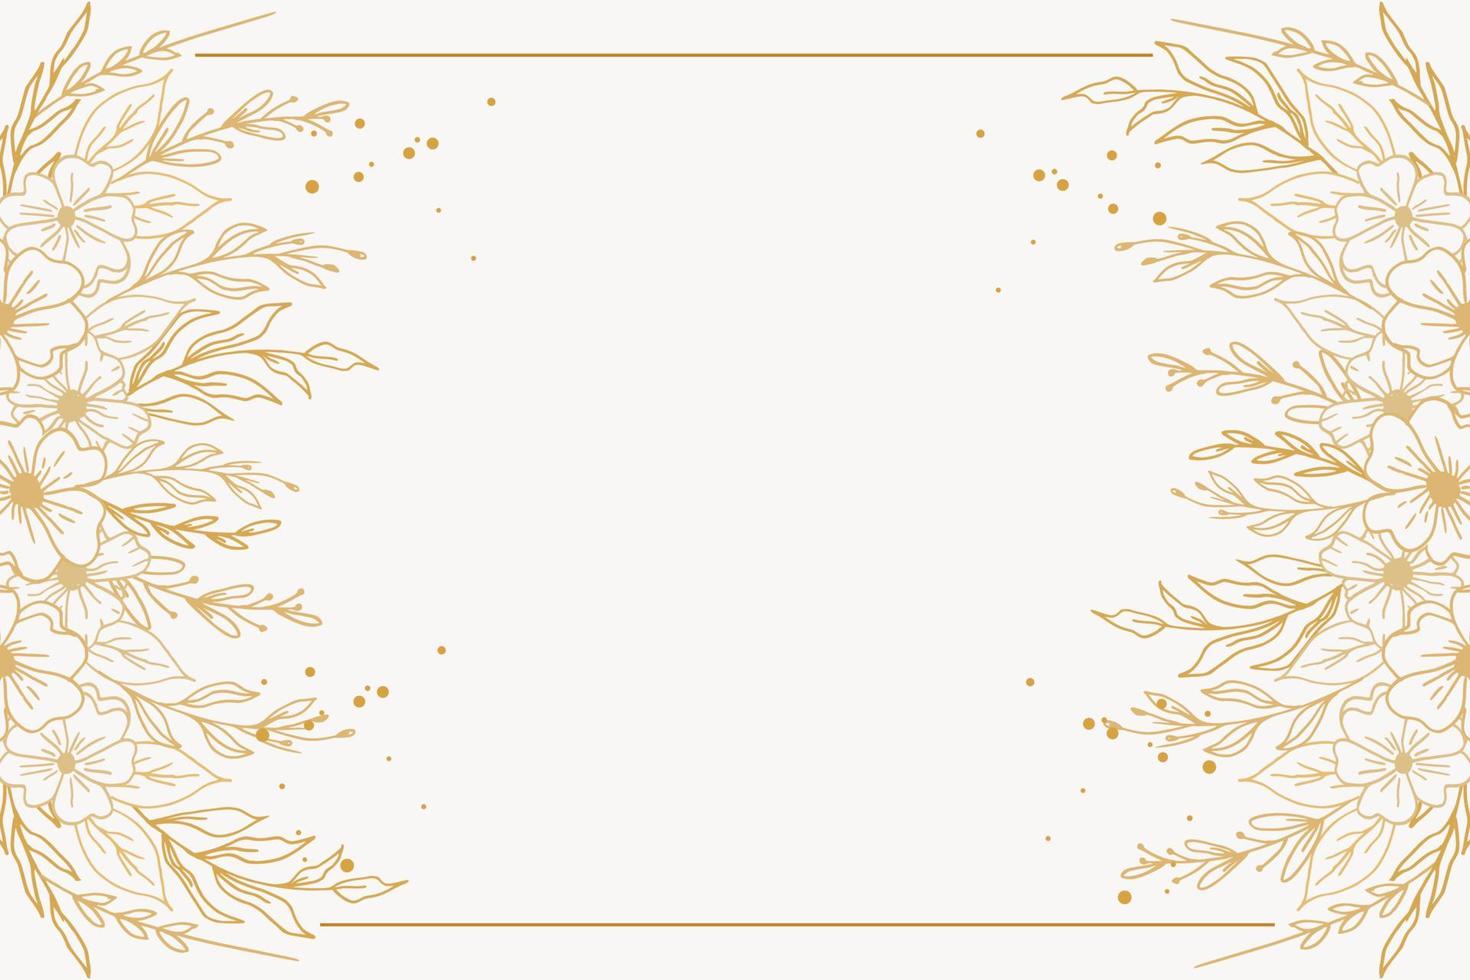 Elegant golden floral background with hand drawn flowers and leaves border vector